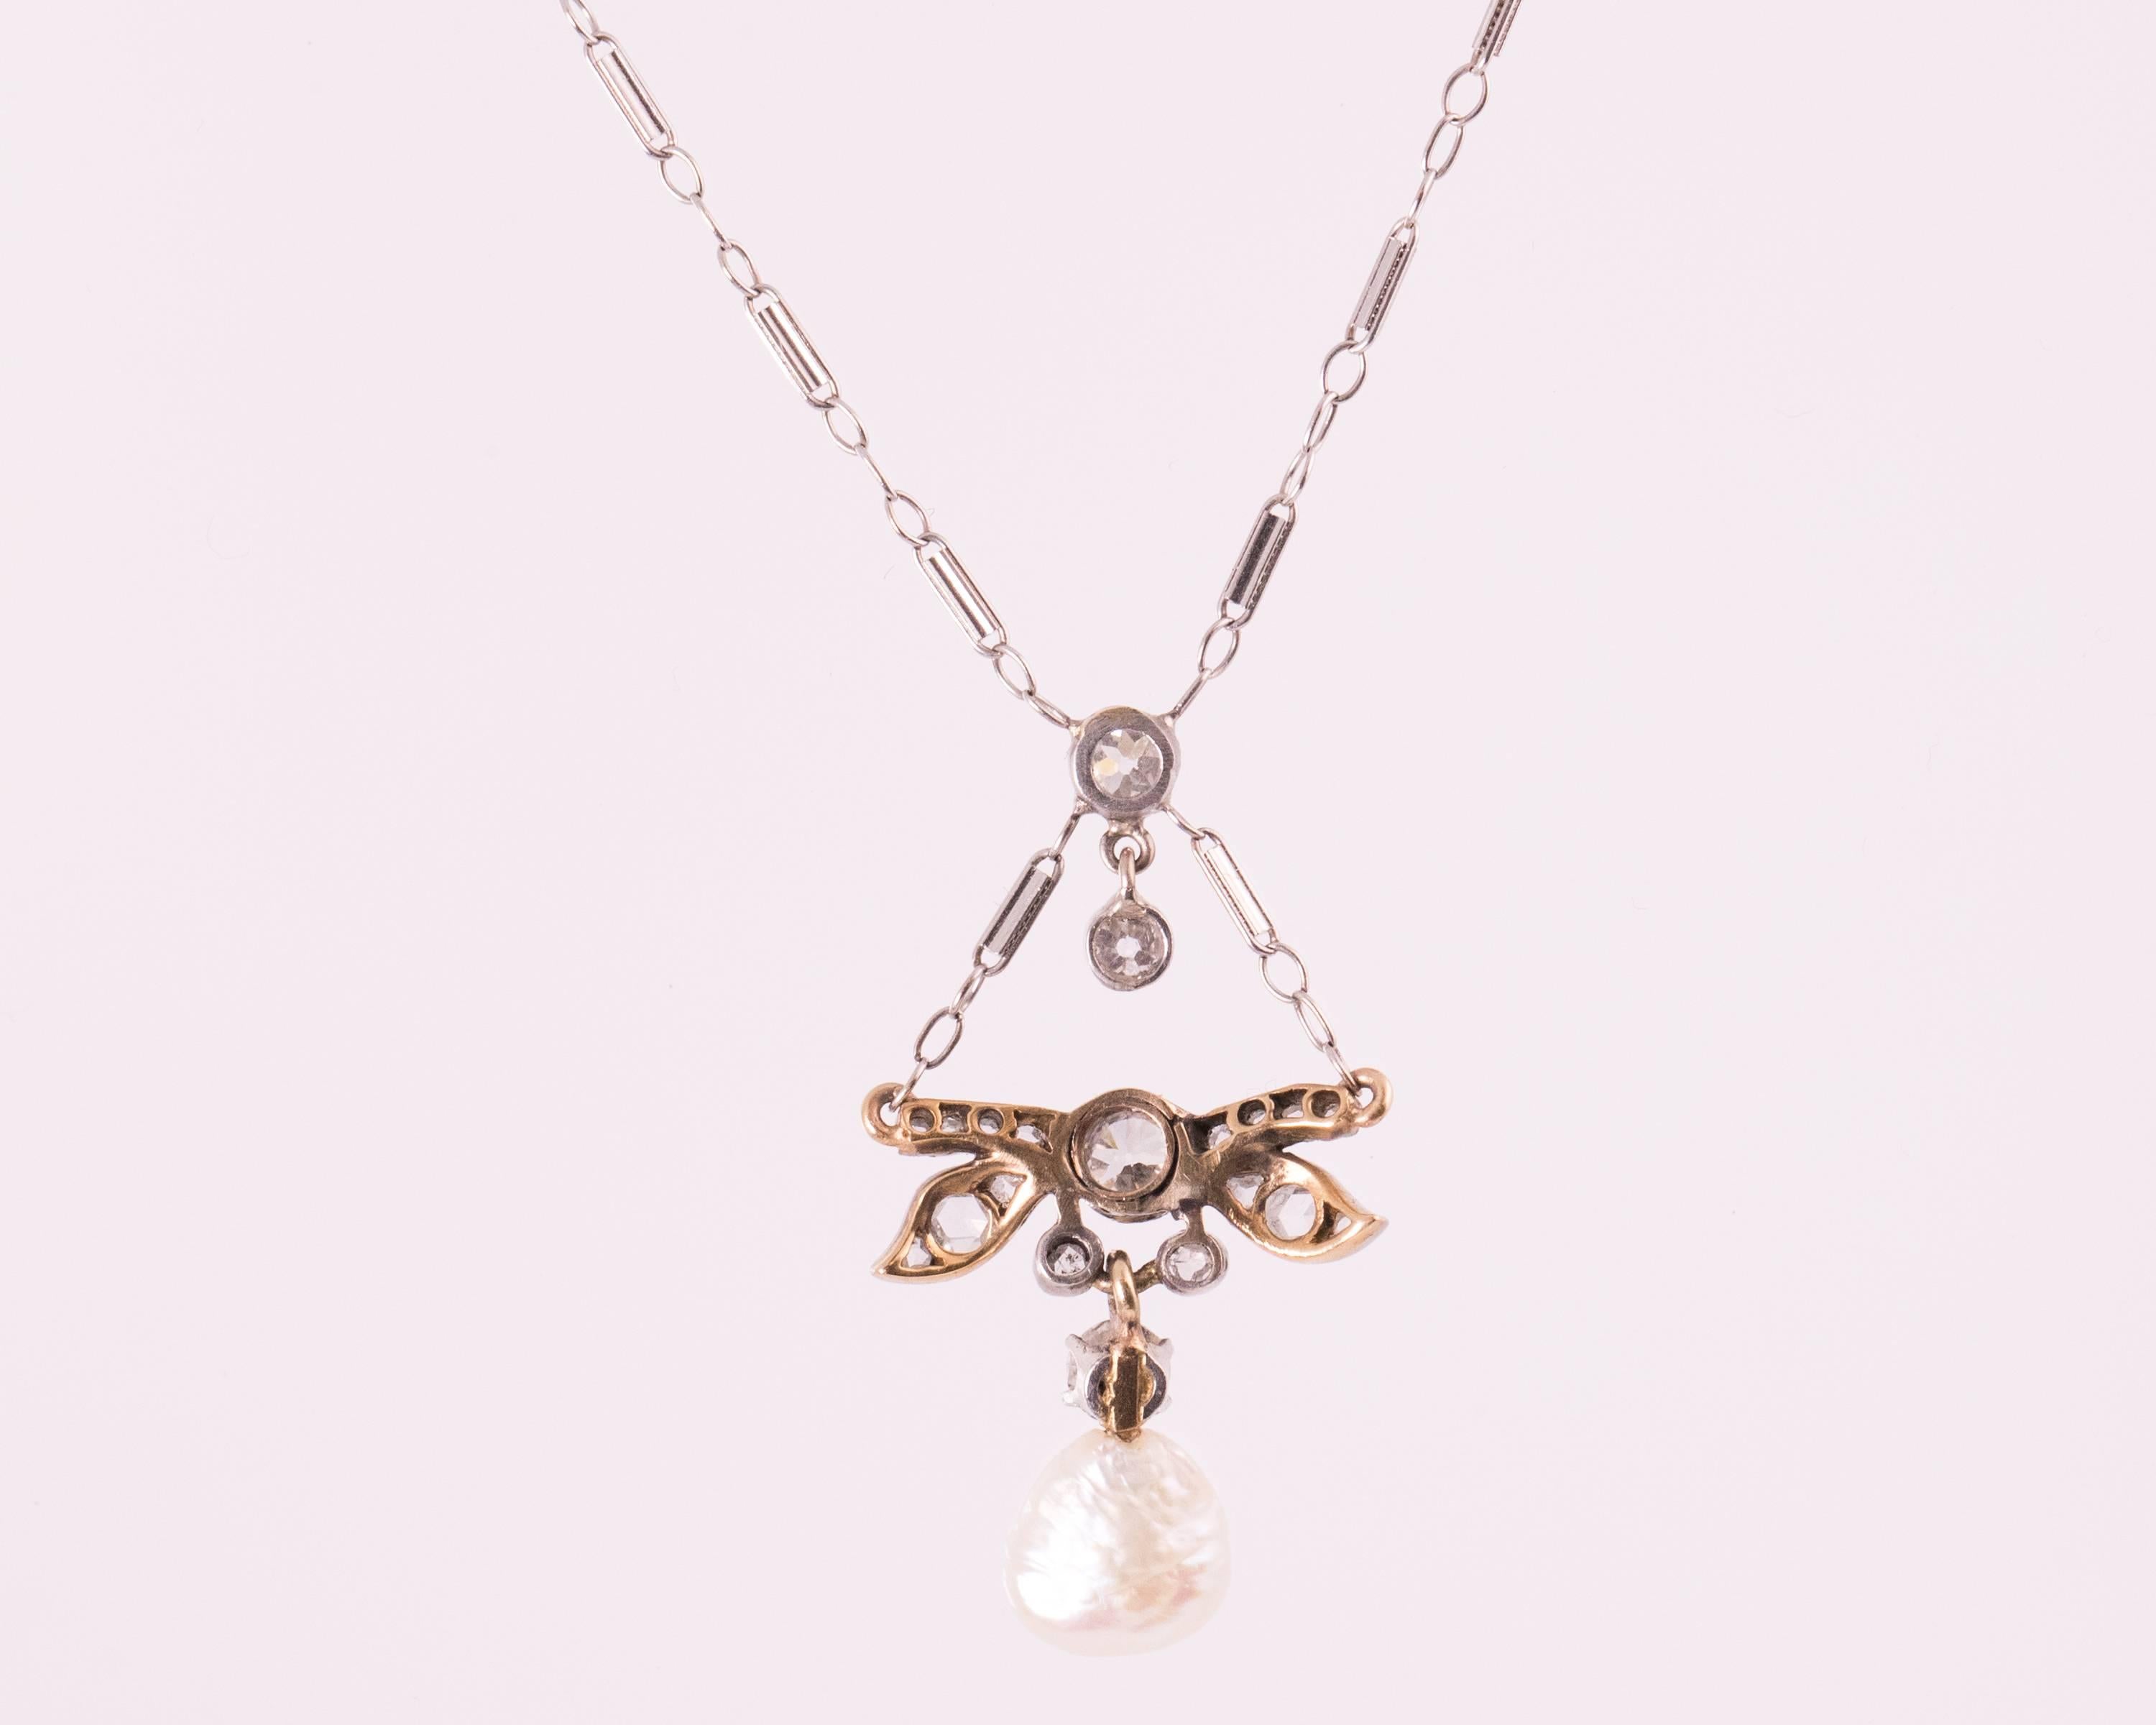 This 1870s Victorian Dragonfly motif Necklace features a Natural Free Form Pearl and Old Mine Diamonds in 14 Karat White Gold and Platinum. A Diamond Dragonfly charm drops from the chain and suspends a diamond and pearl charm. The Natural Pearl